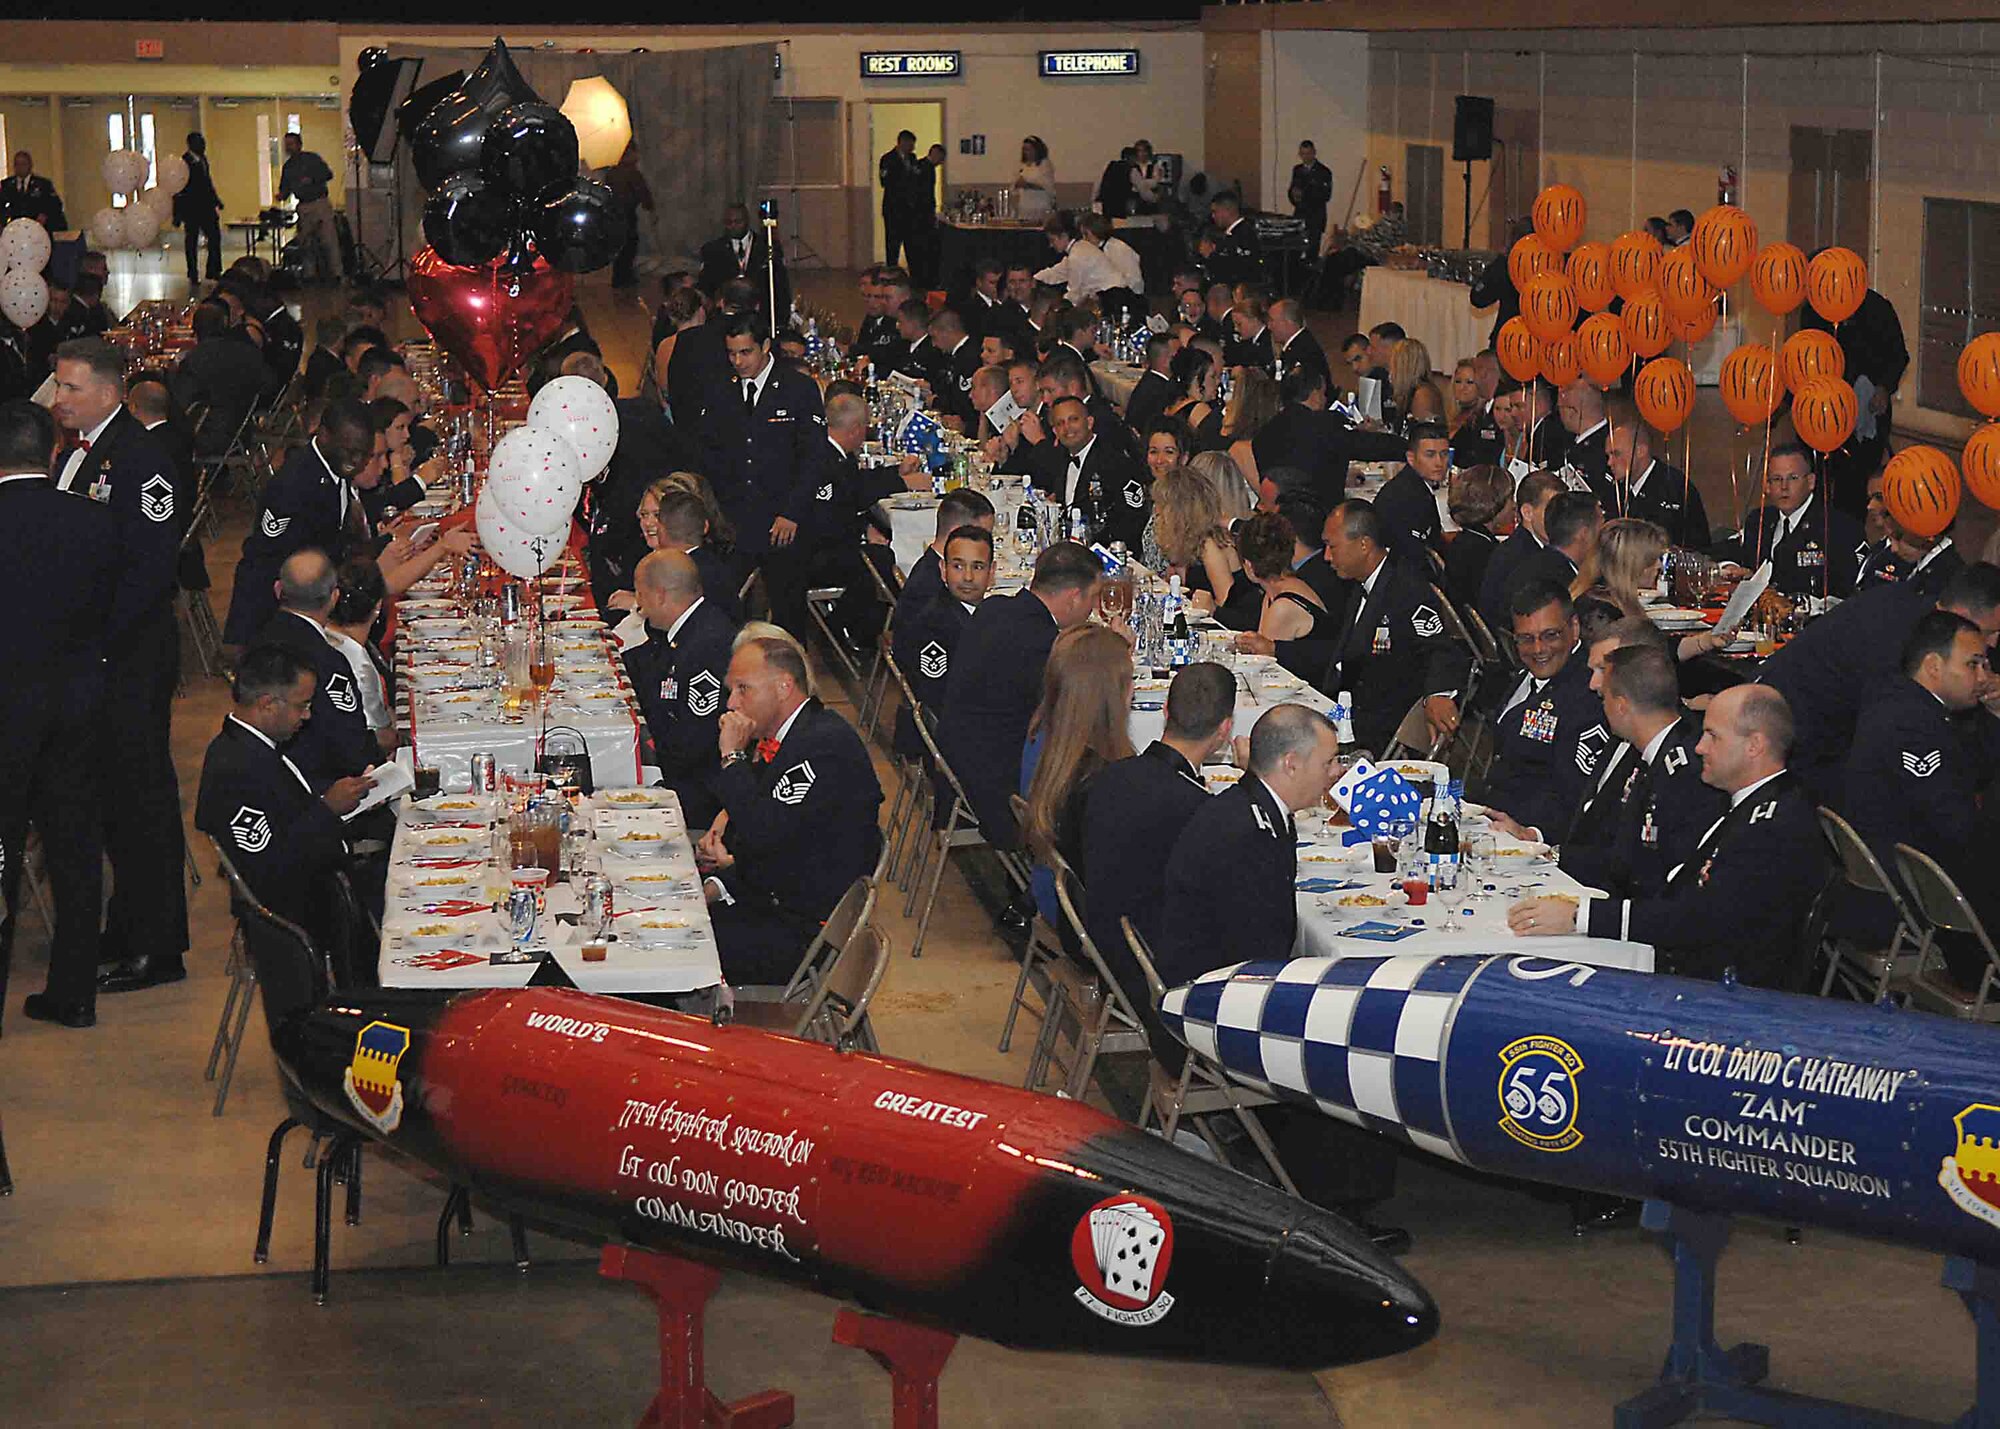 SUMTER, S.C. -- Airmen from the 20th Maintenance Group take their seats to begin the Maintenance Professional of the Year Banquet on April 13 at the Sumter Exhibition Center. The Professional of the Year banquet is held to highlight the contributions of all 20th MXG members and to recognize the most outstanding Airmen within the group. (U.S. Air Force photo/Staff Sgt. Nathan Bevier)